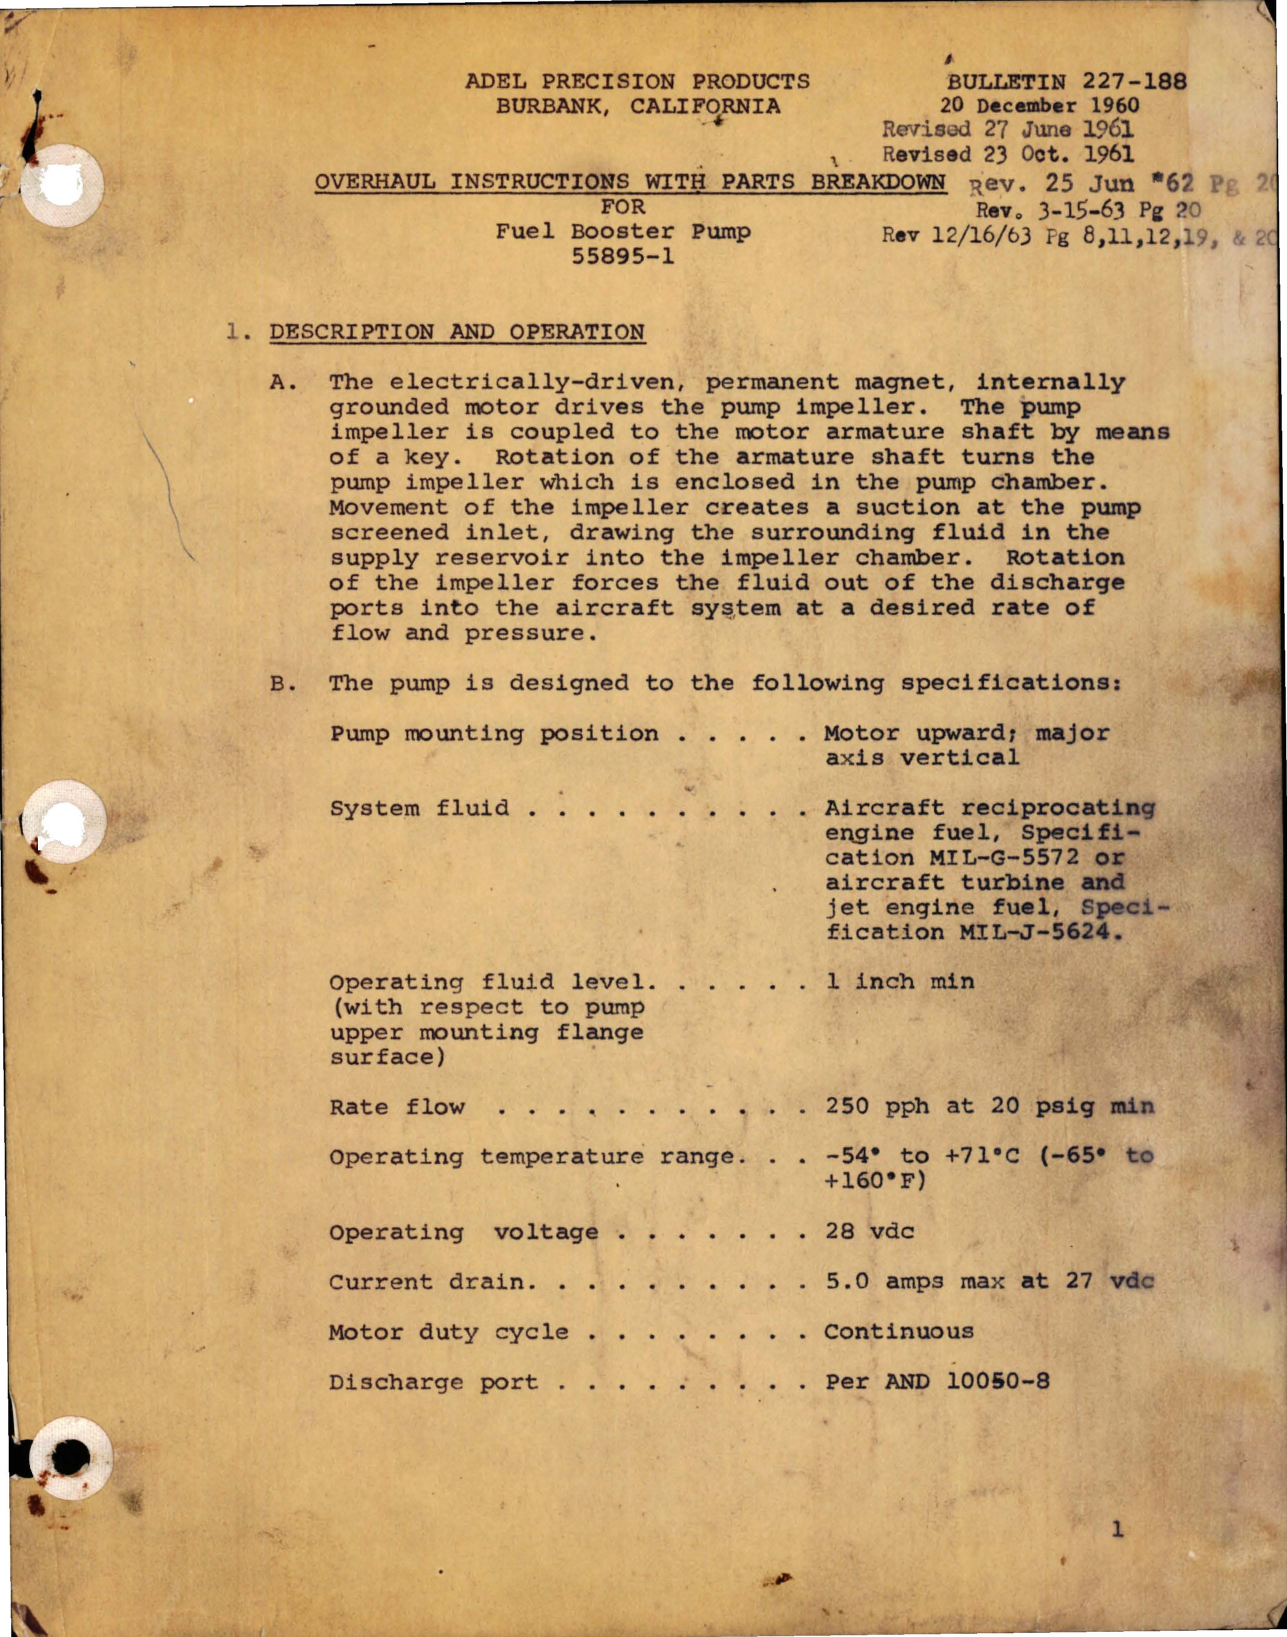 Sample page 1 from AirCorps Library document: Overhaul Instructions with Parts Breakdown for Fuel Booster Pump - 55895-1